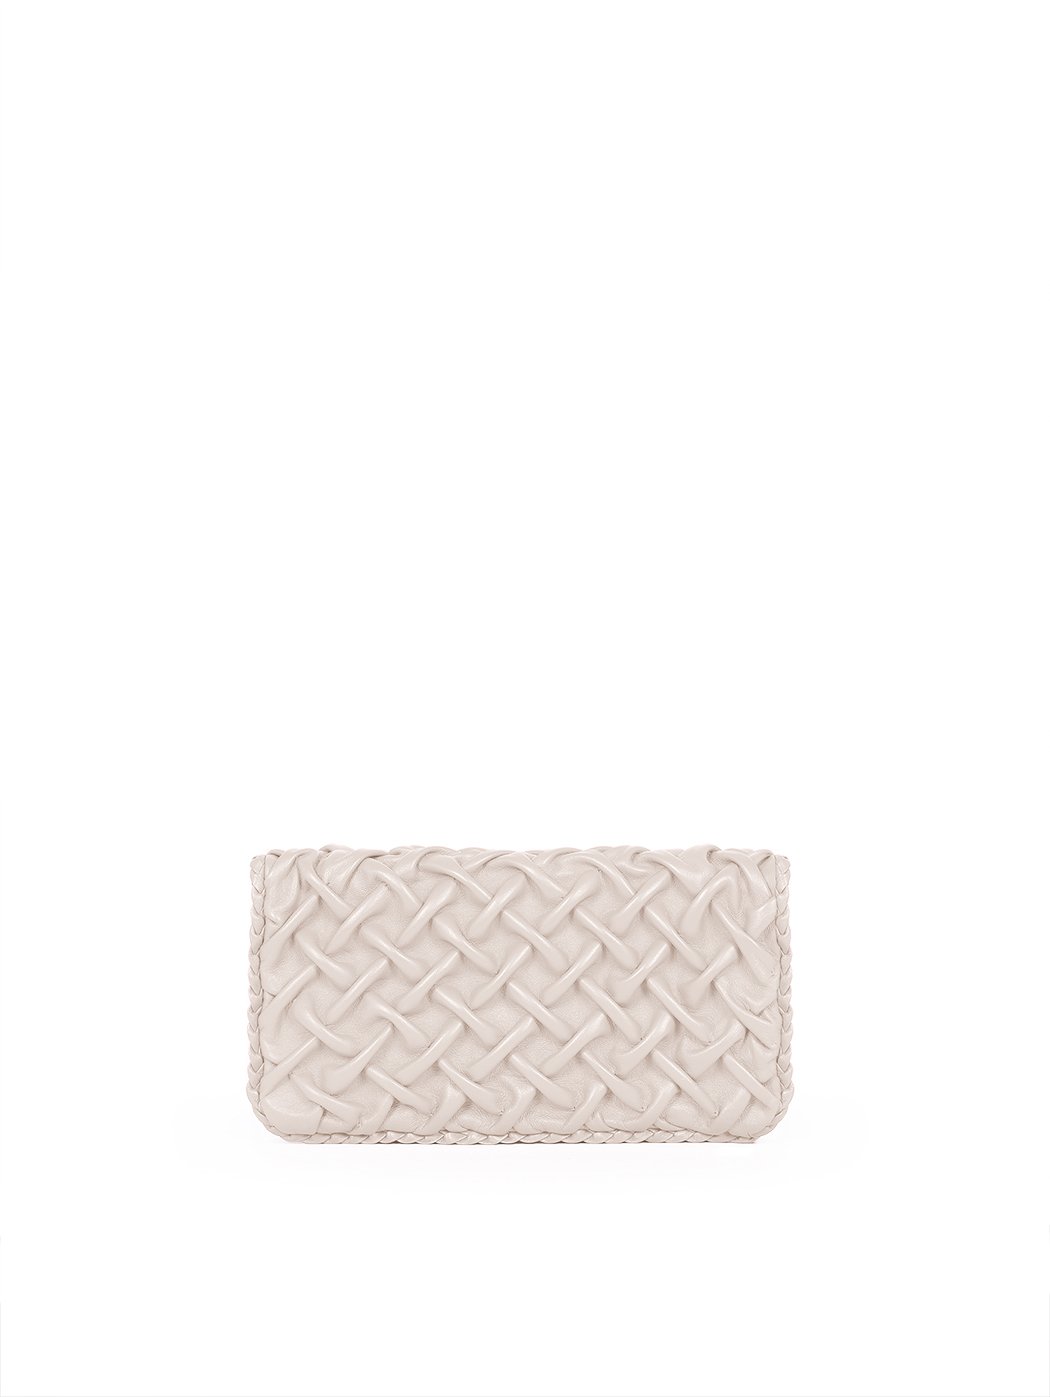 Foldover Crossbody Quilted Weave Clutch Leather Beige